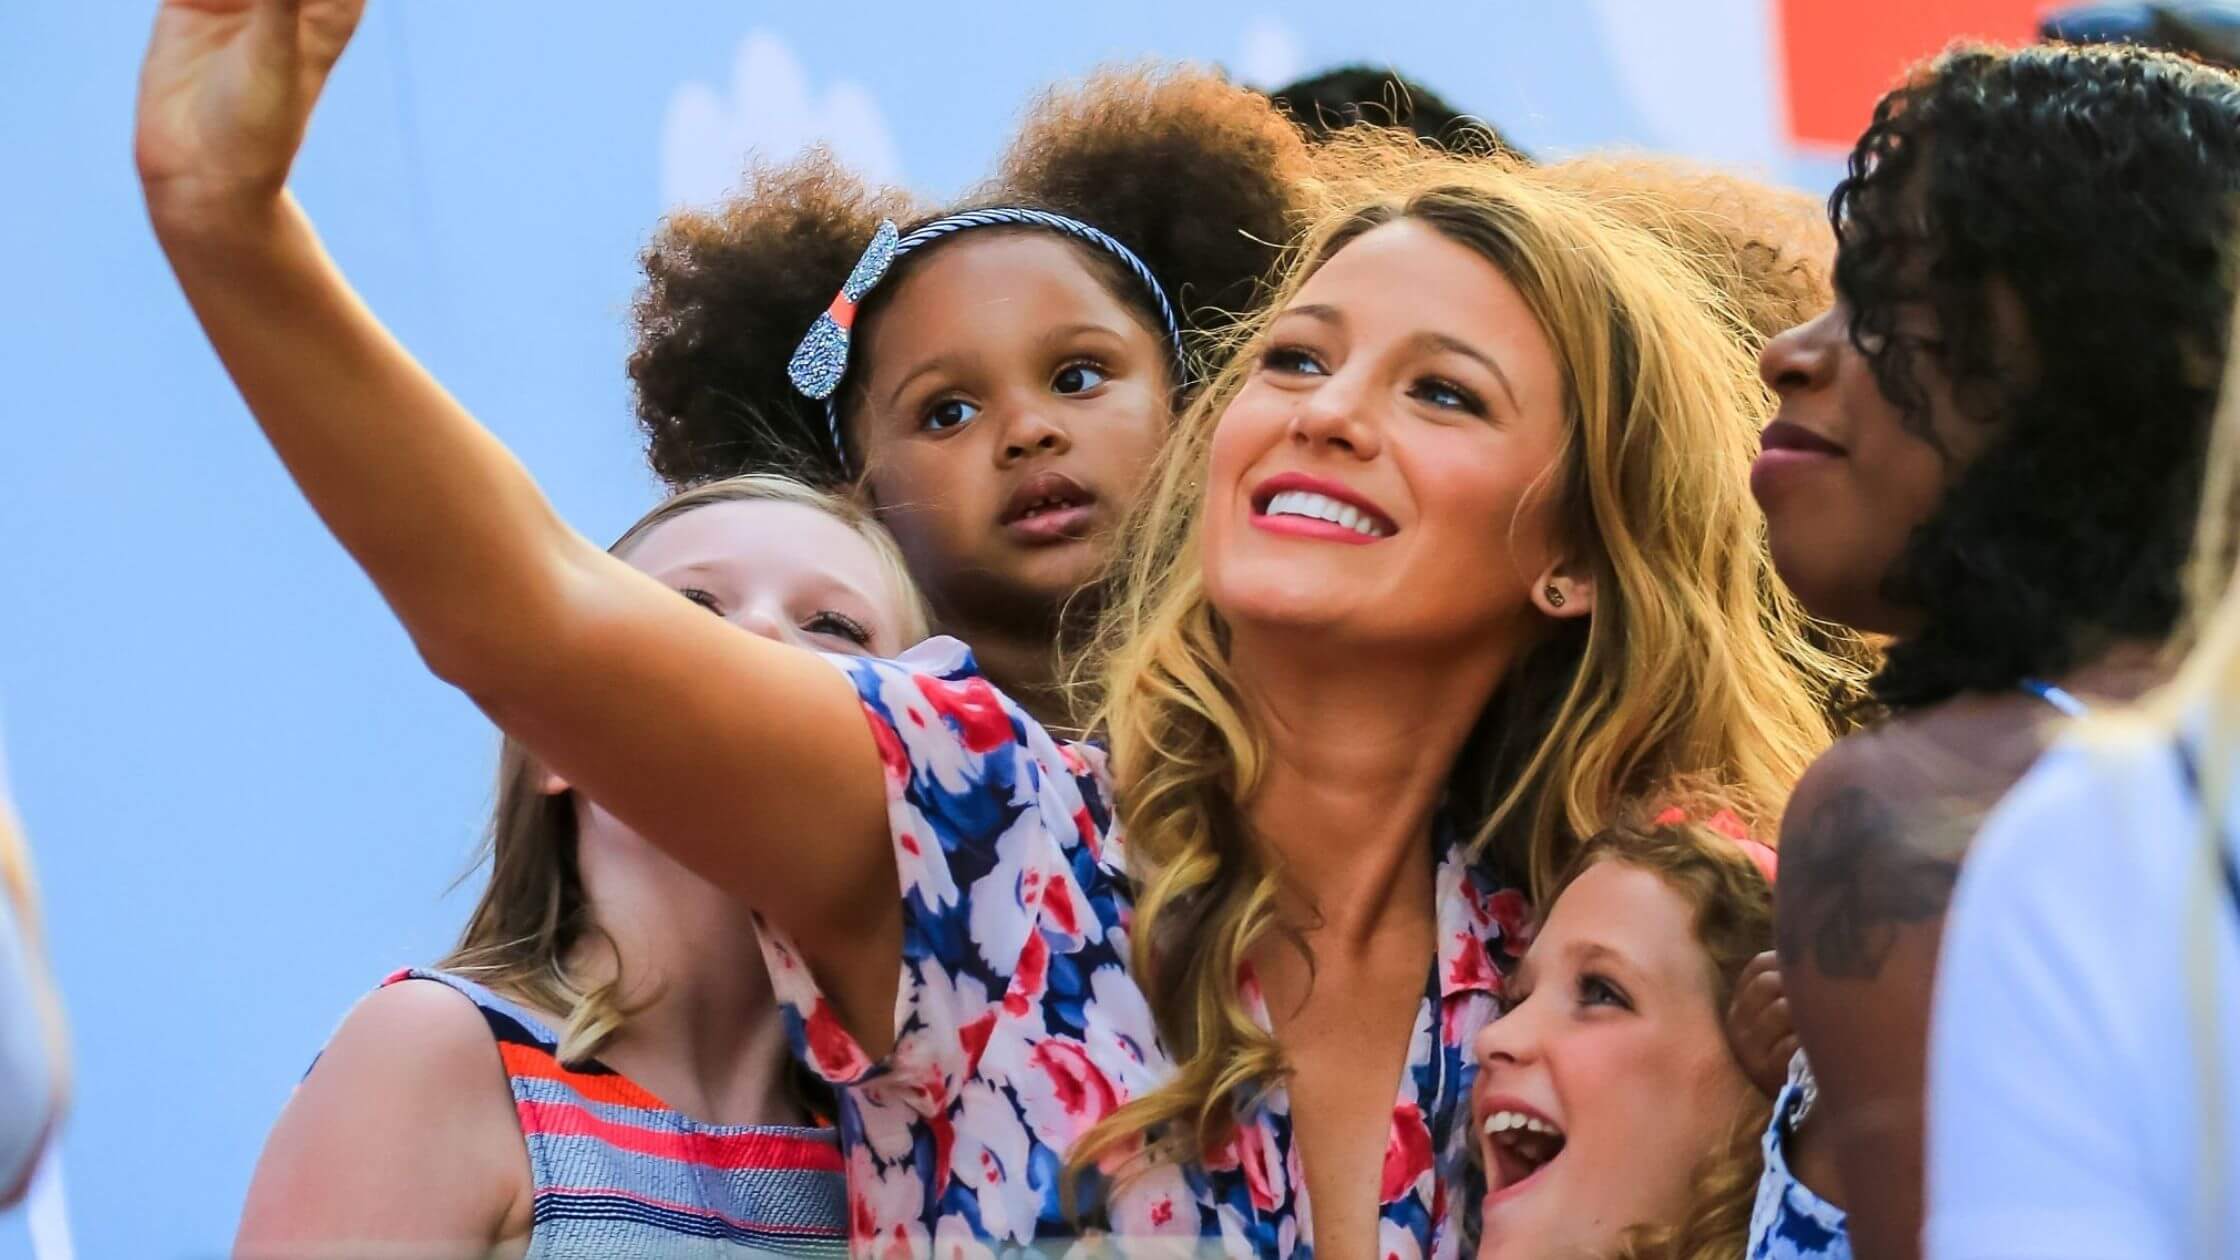 Early Life of Blake Lively